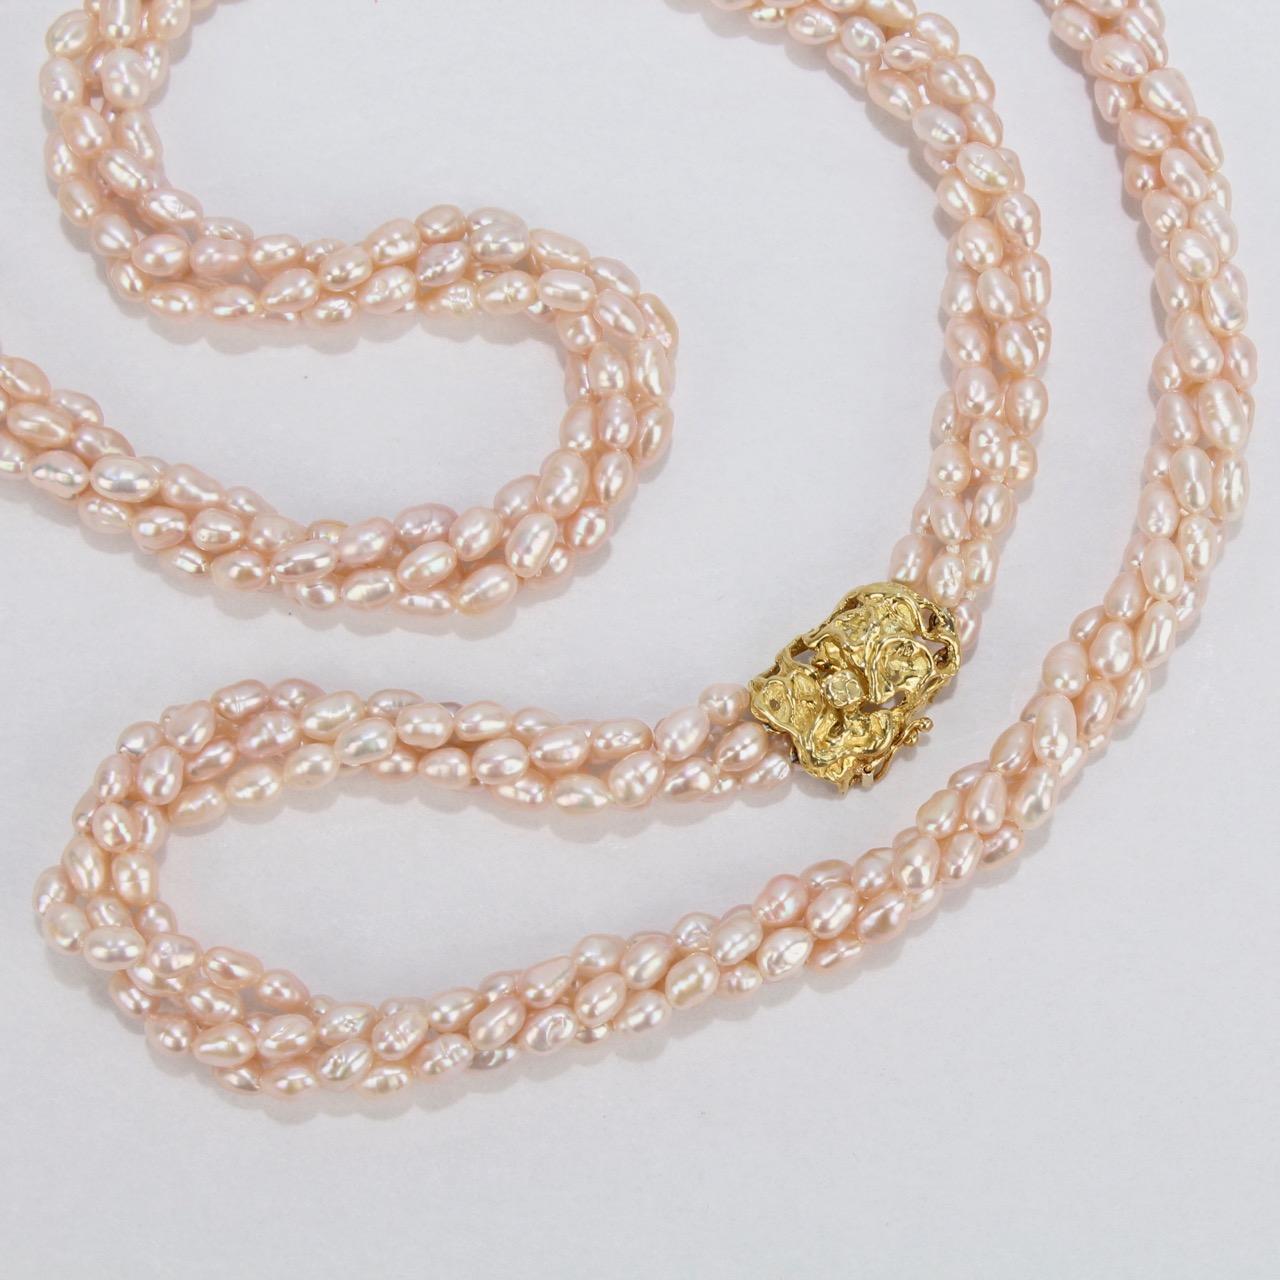 Arthur King 18 Karat Gold and Fresh Water Pearl Multi-Strand Necklace 7